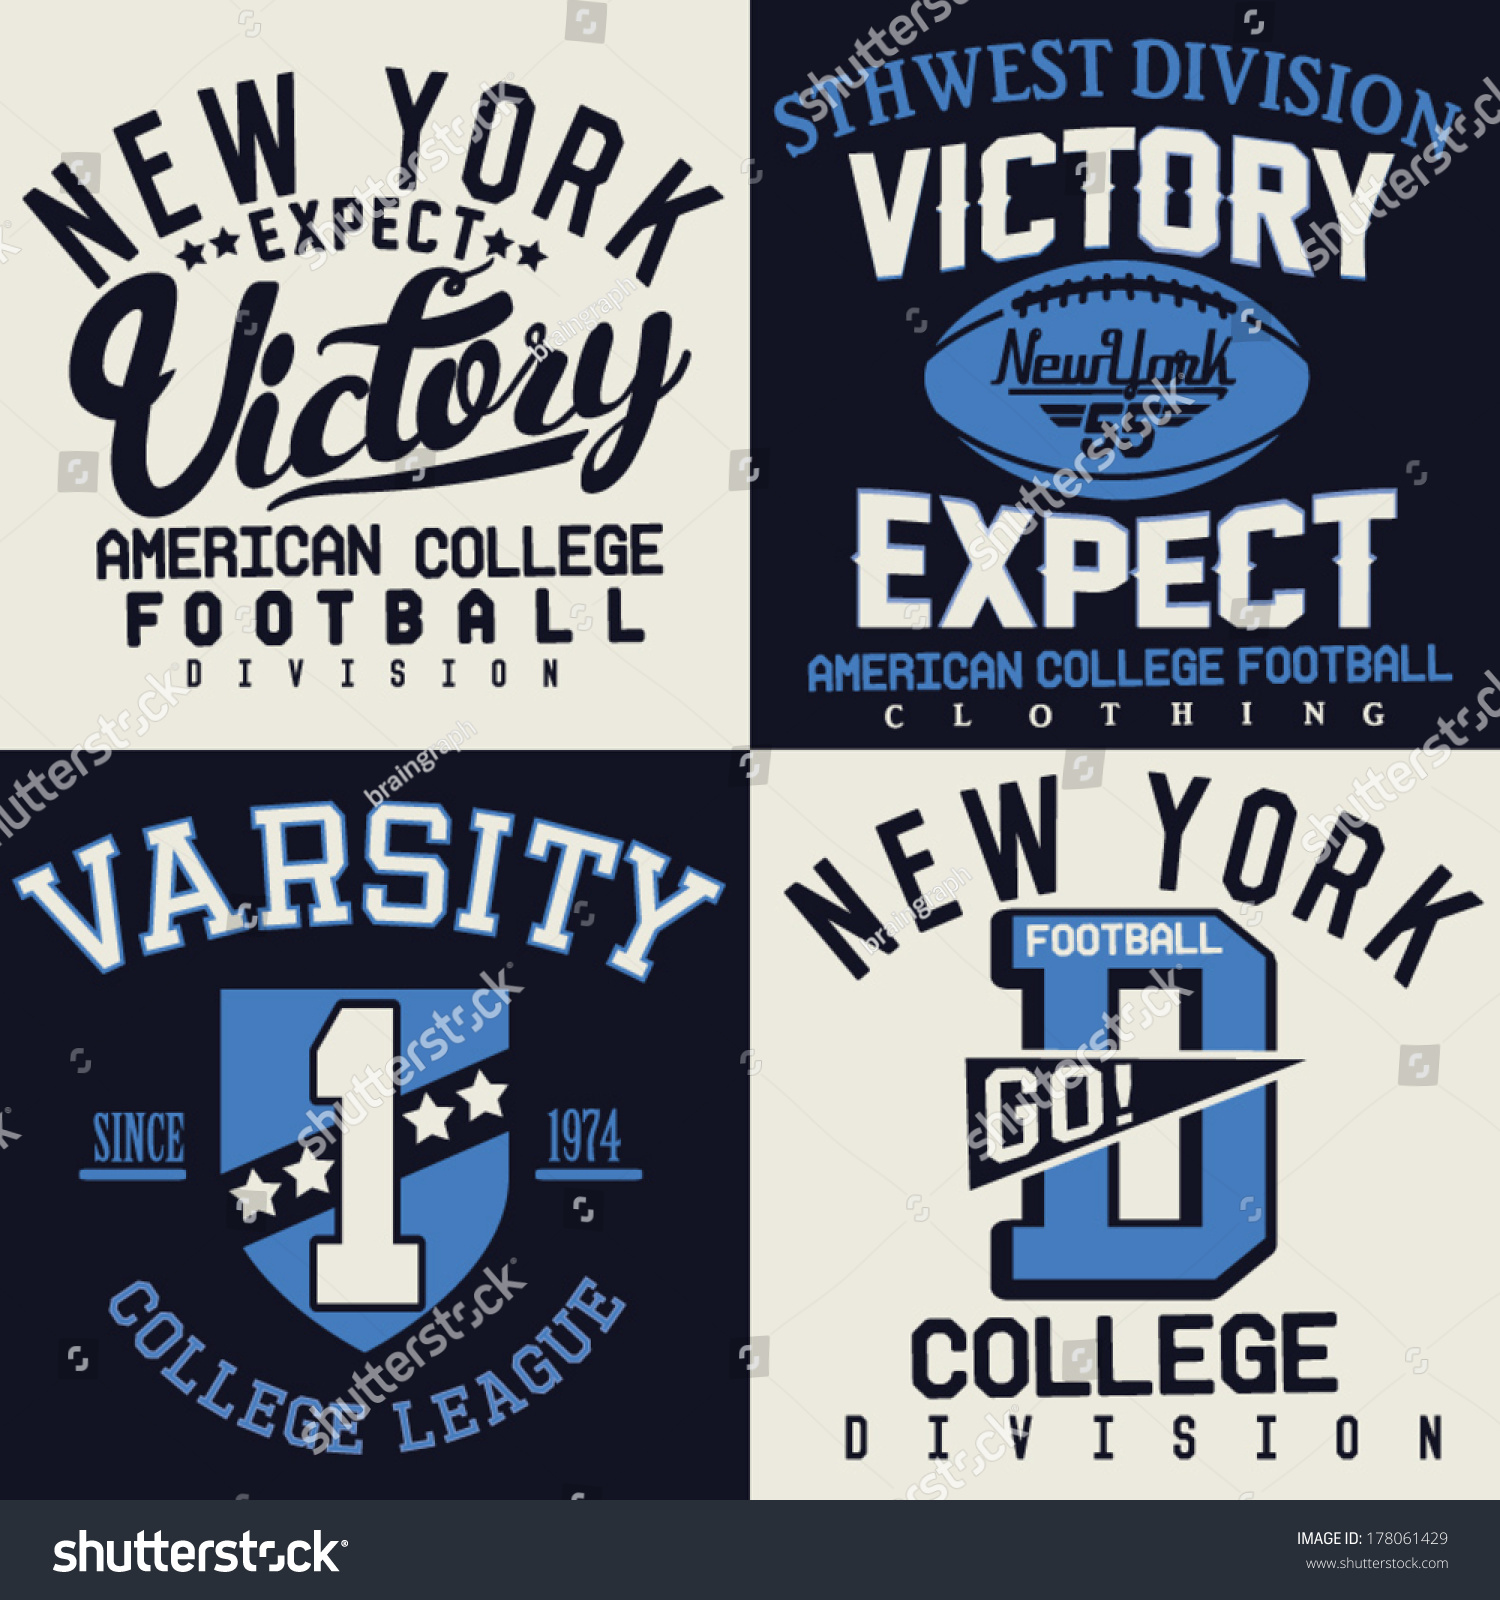 College Graphic Design For T-Shirt Stock Vector 178061429 : Shutterstock